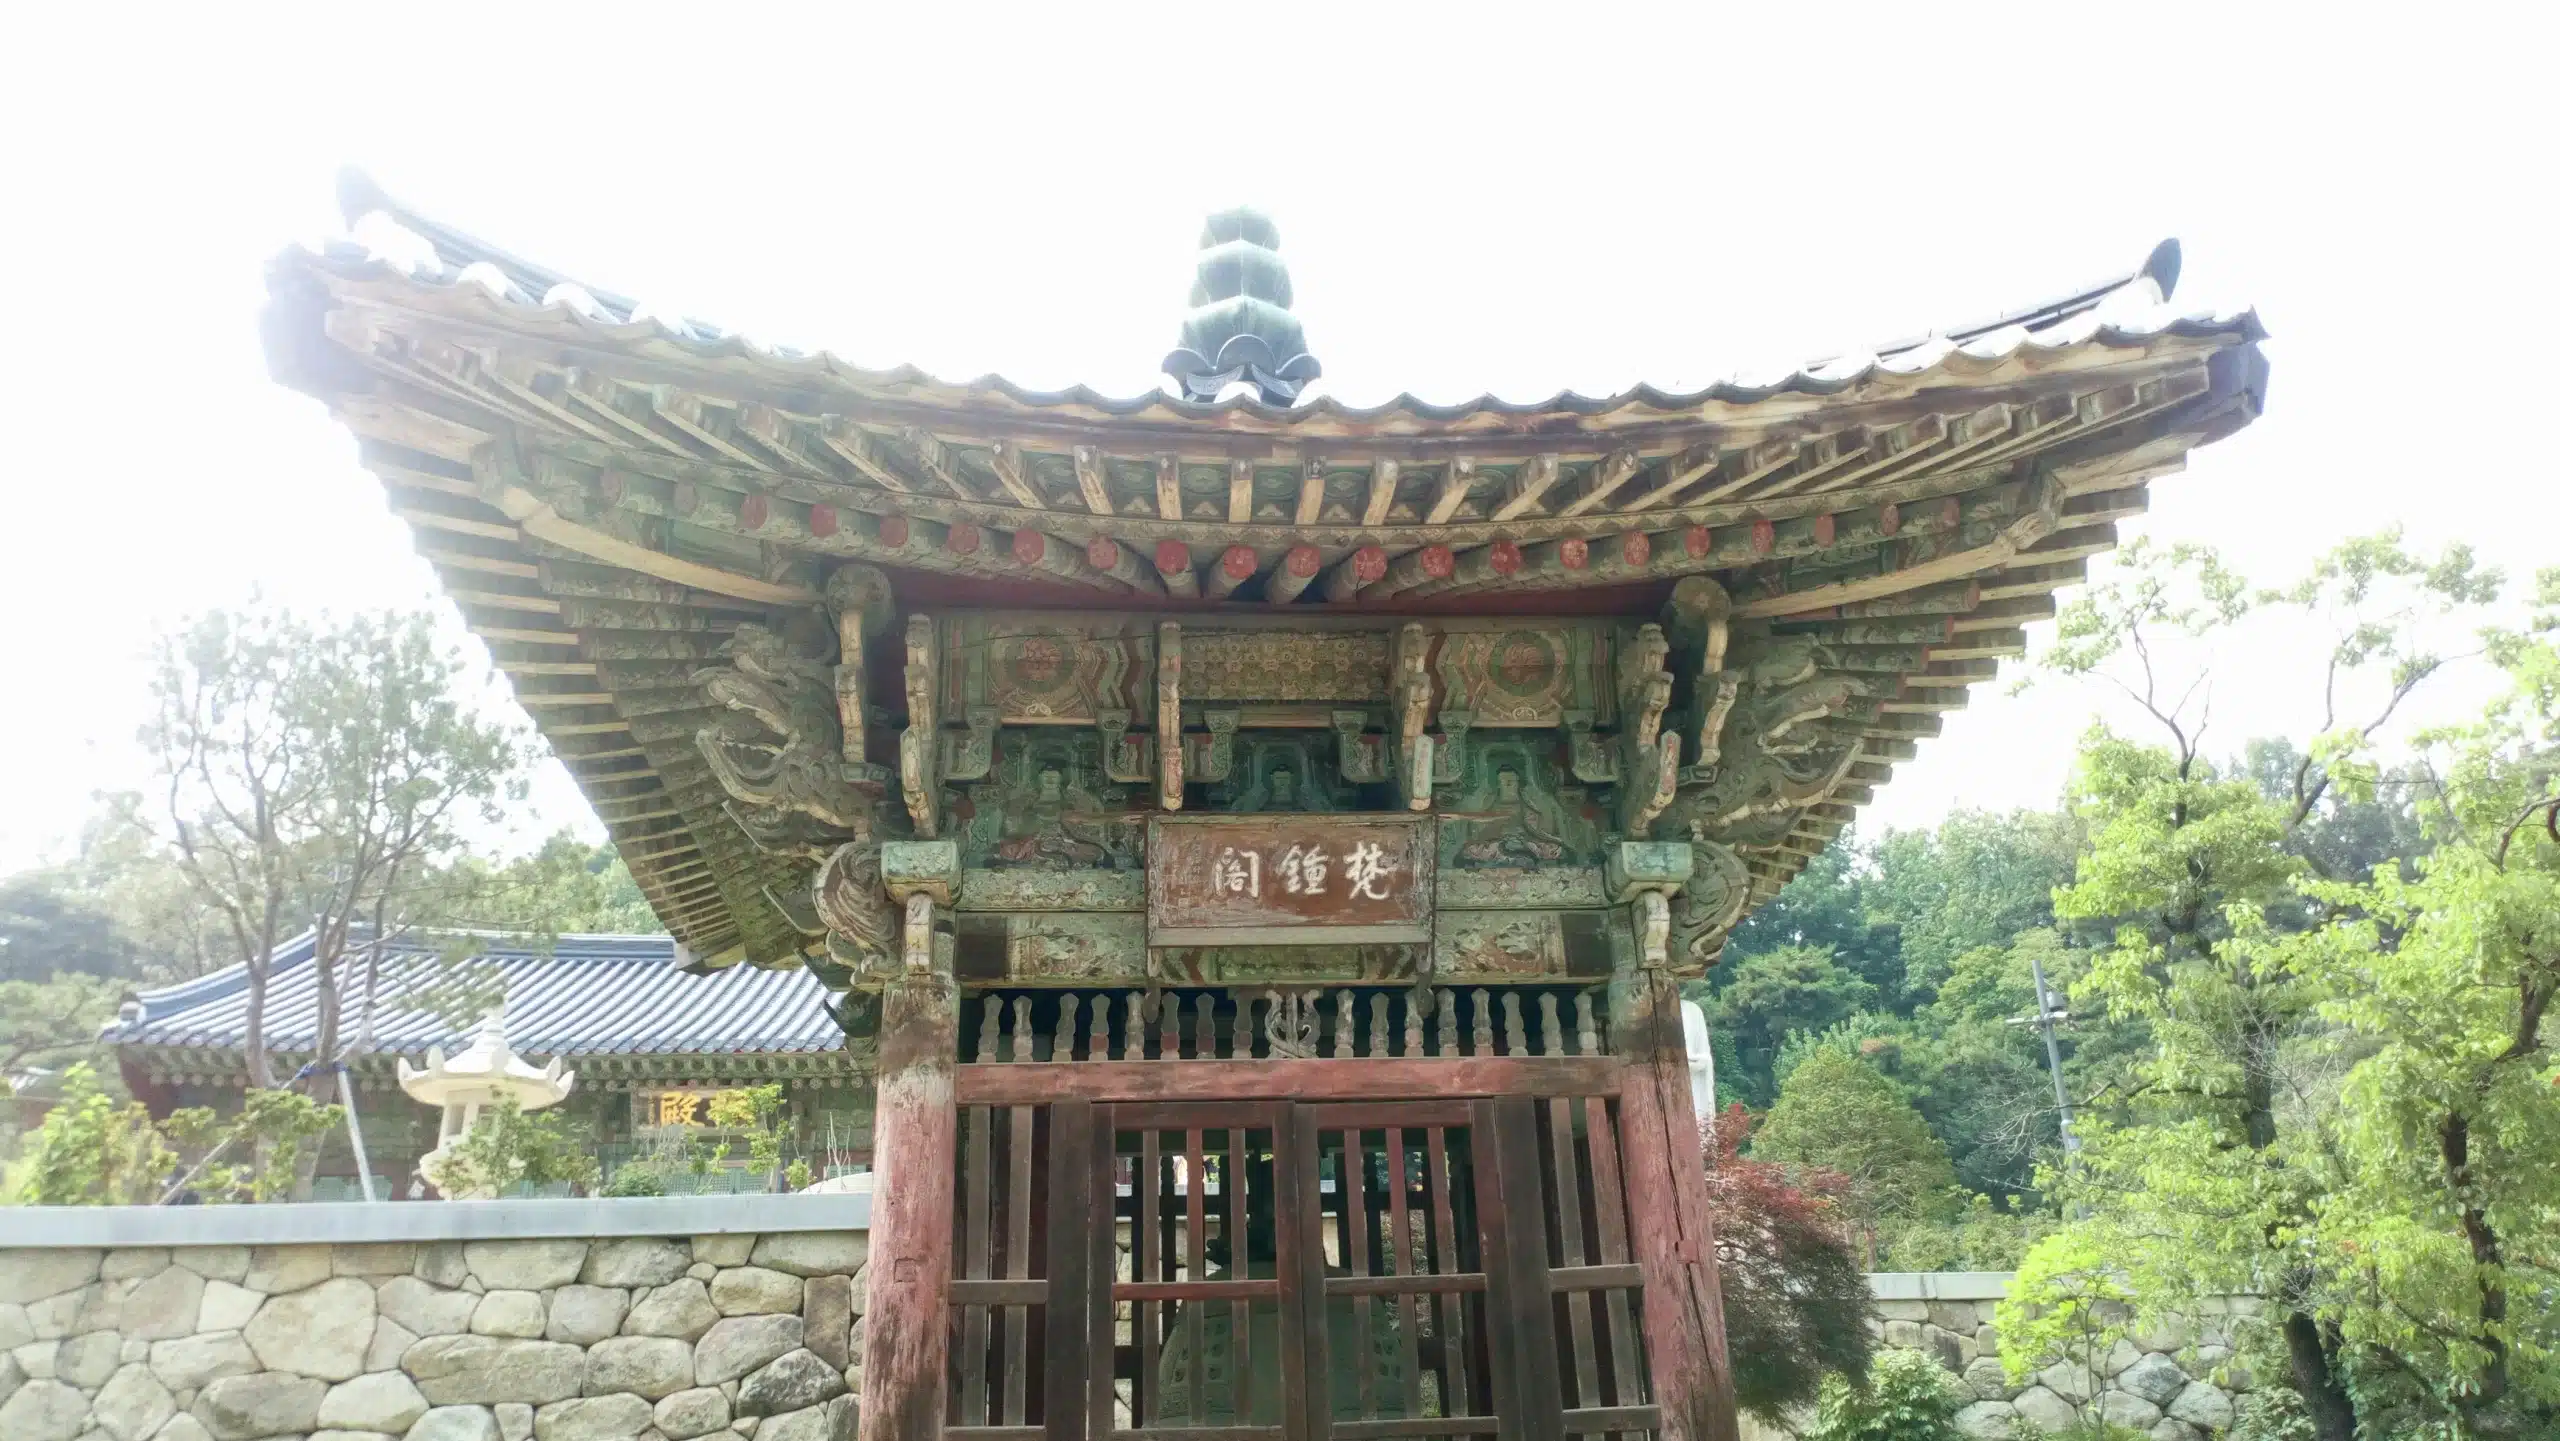 2 Days in Seoul: a full itinerary that takes in all of the traditions, history and modernity of this fascinating city!